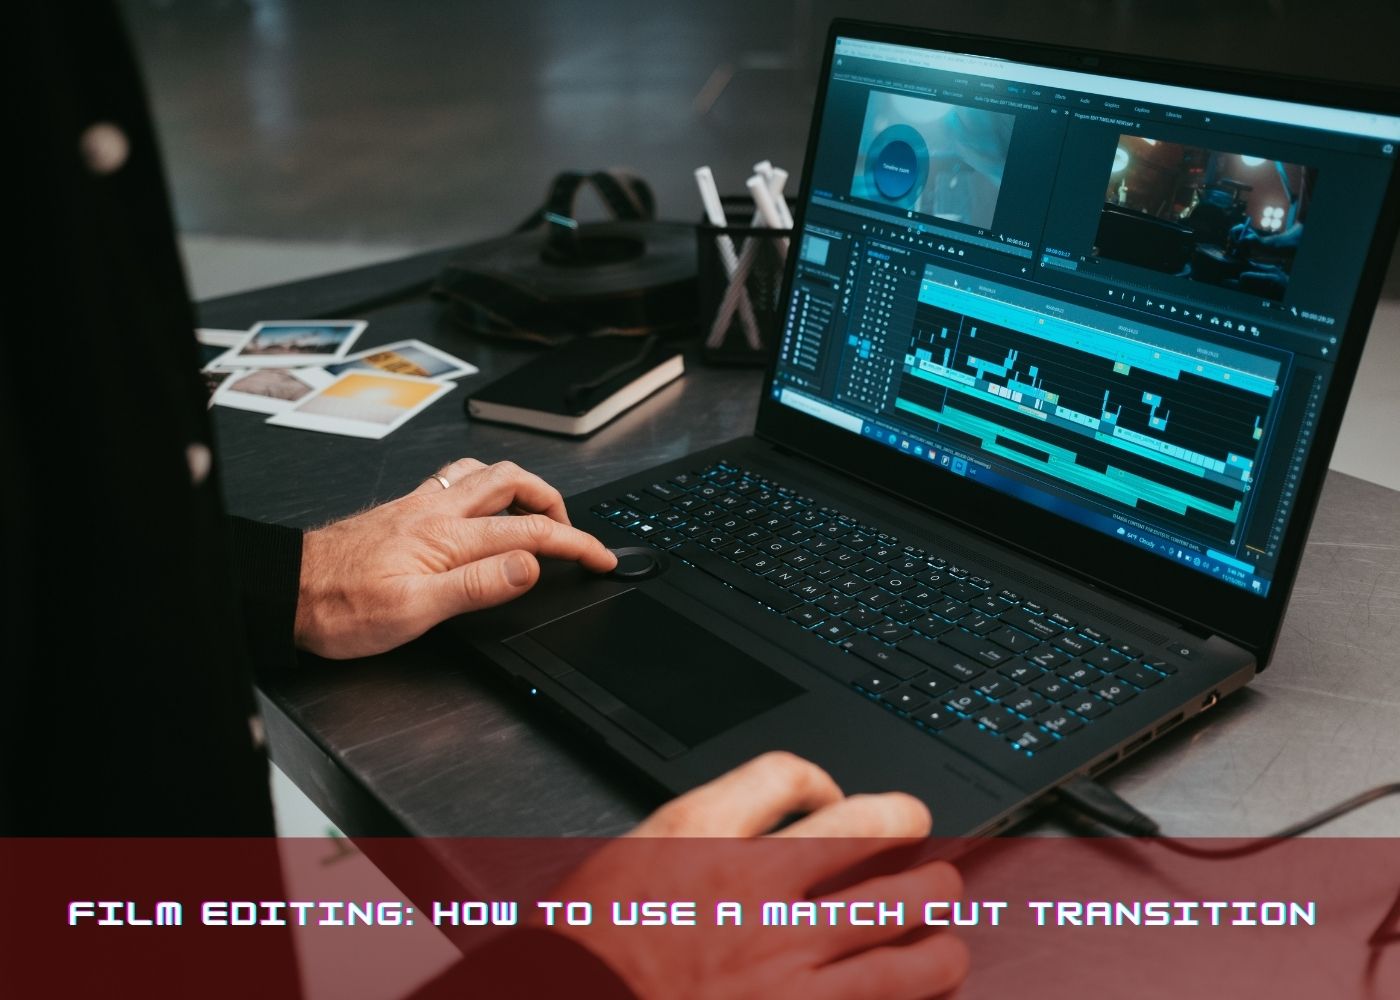 Film Editing: How to use a Match Cut Transition 